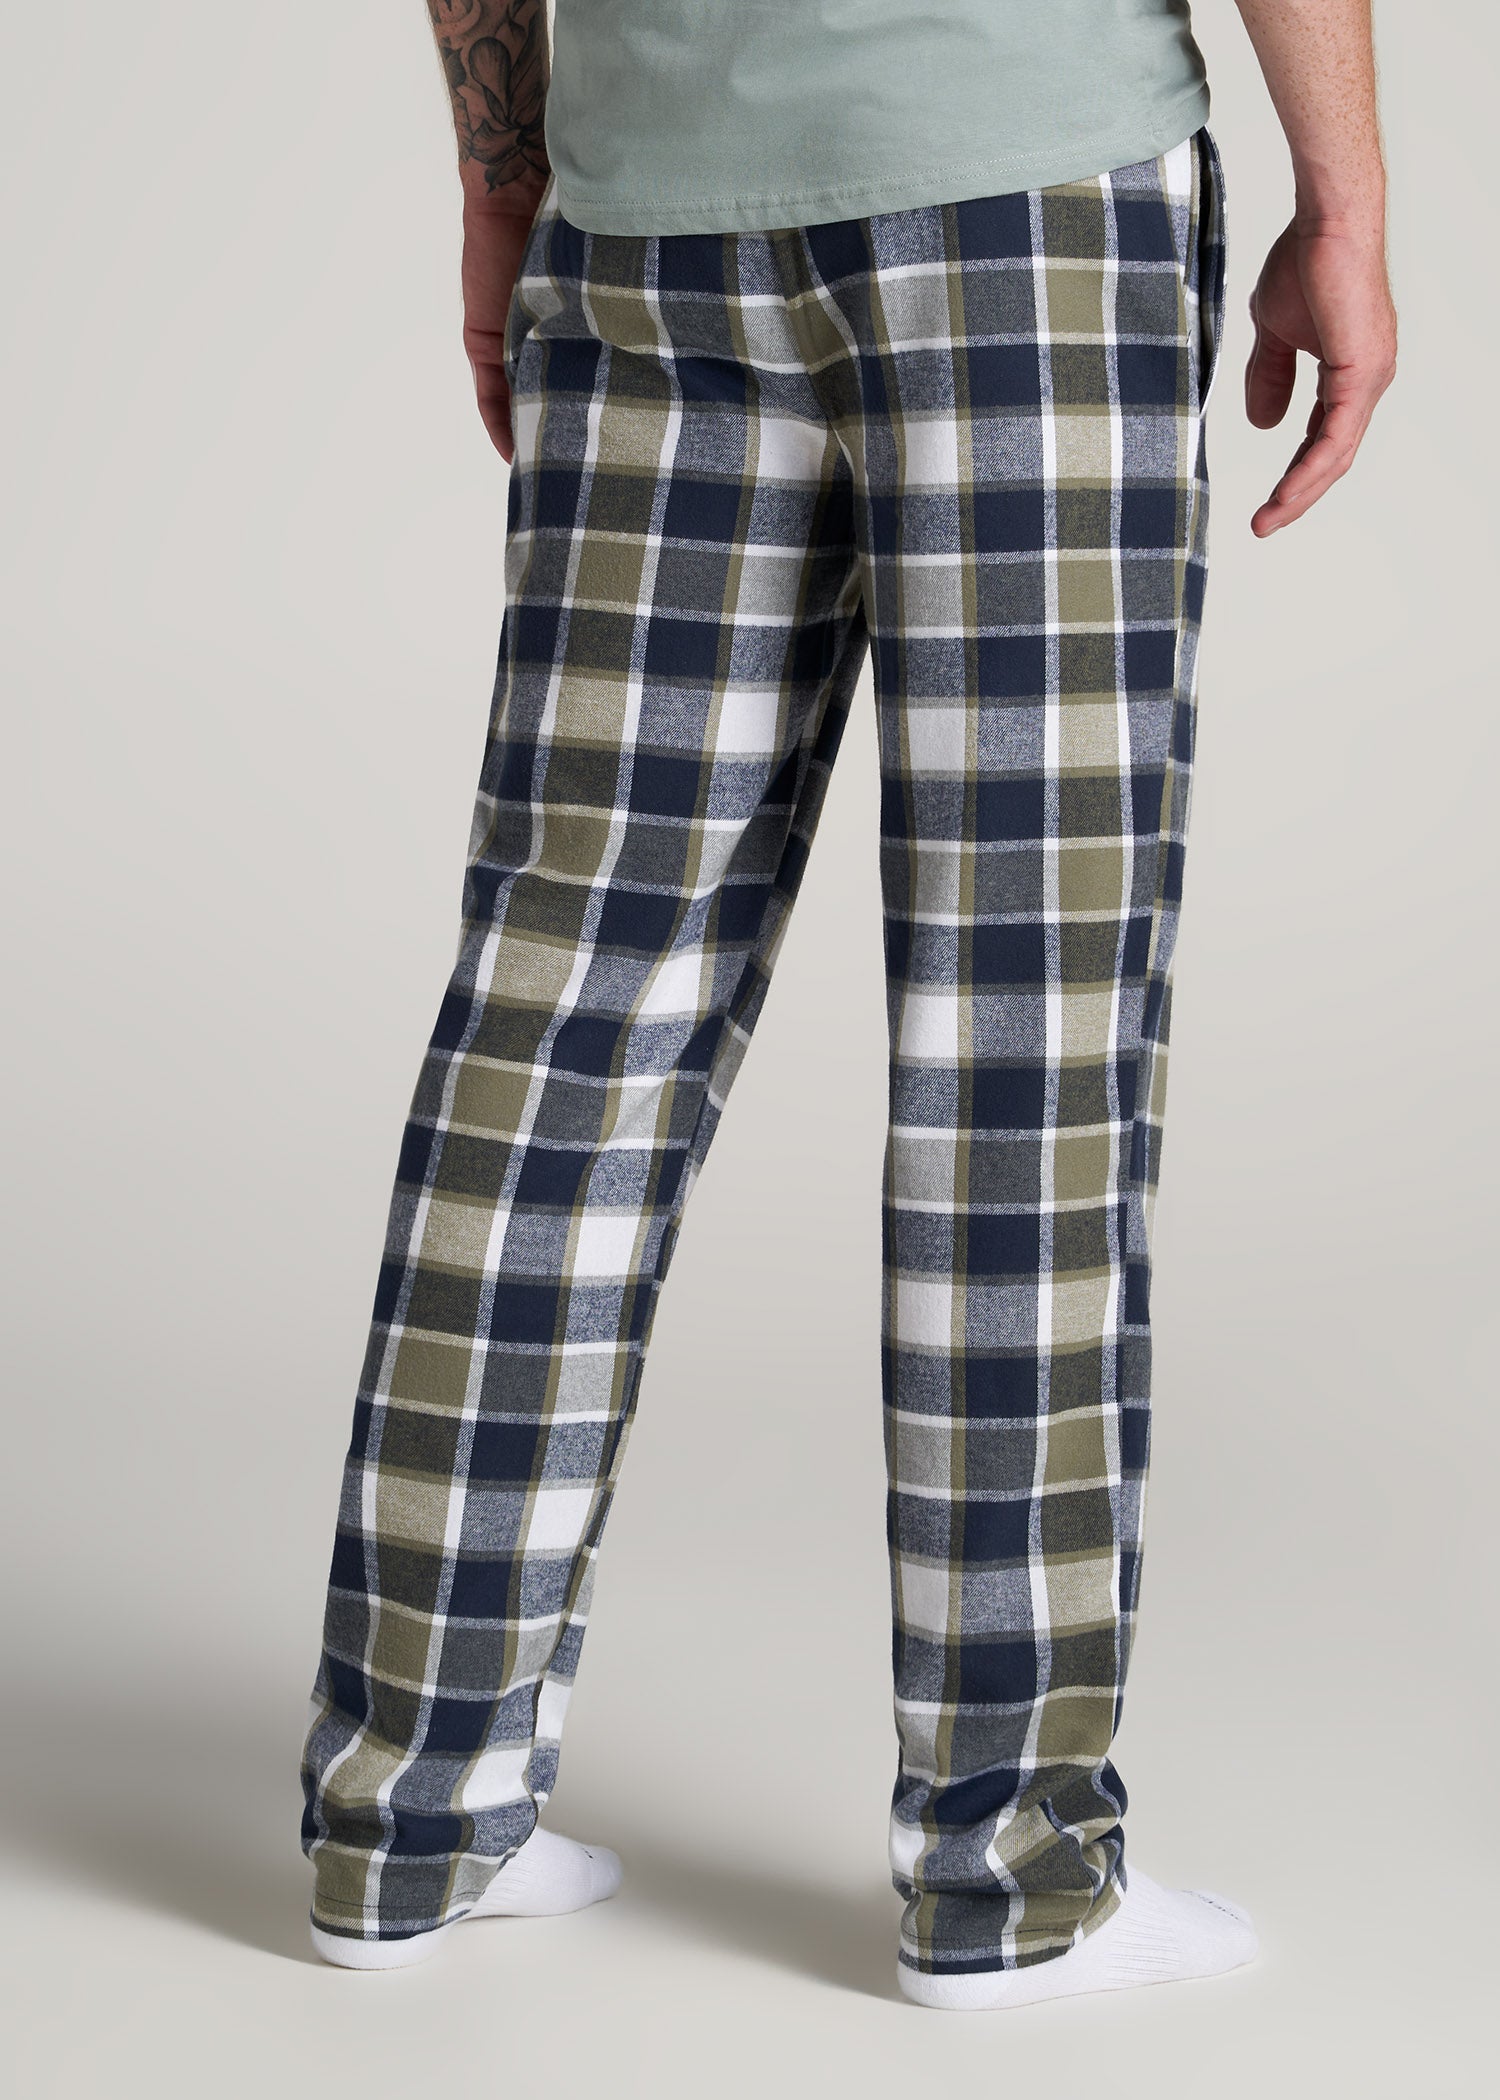 Relaxed Fit Pajama Pants - Green/plaid - Men